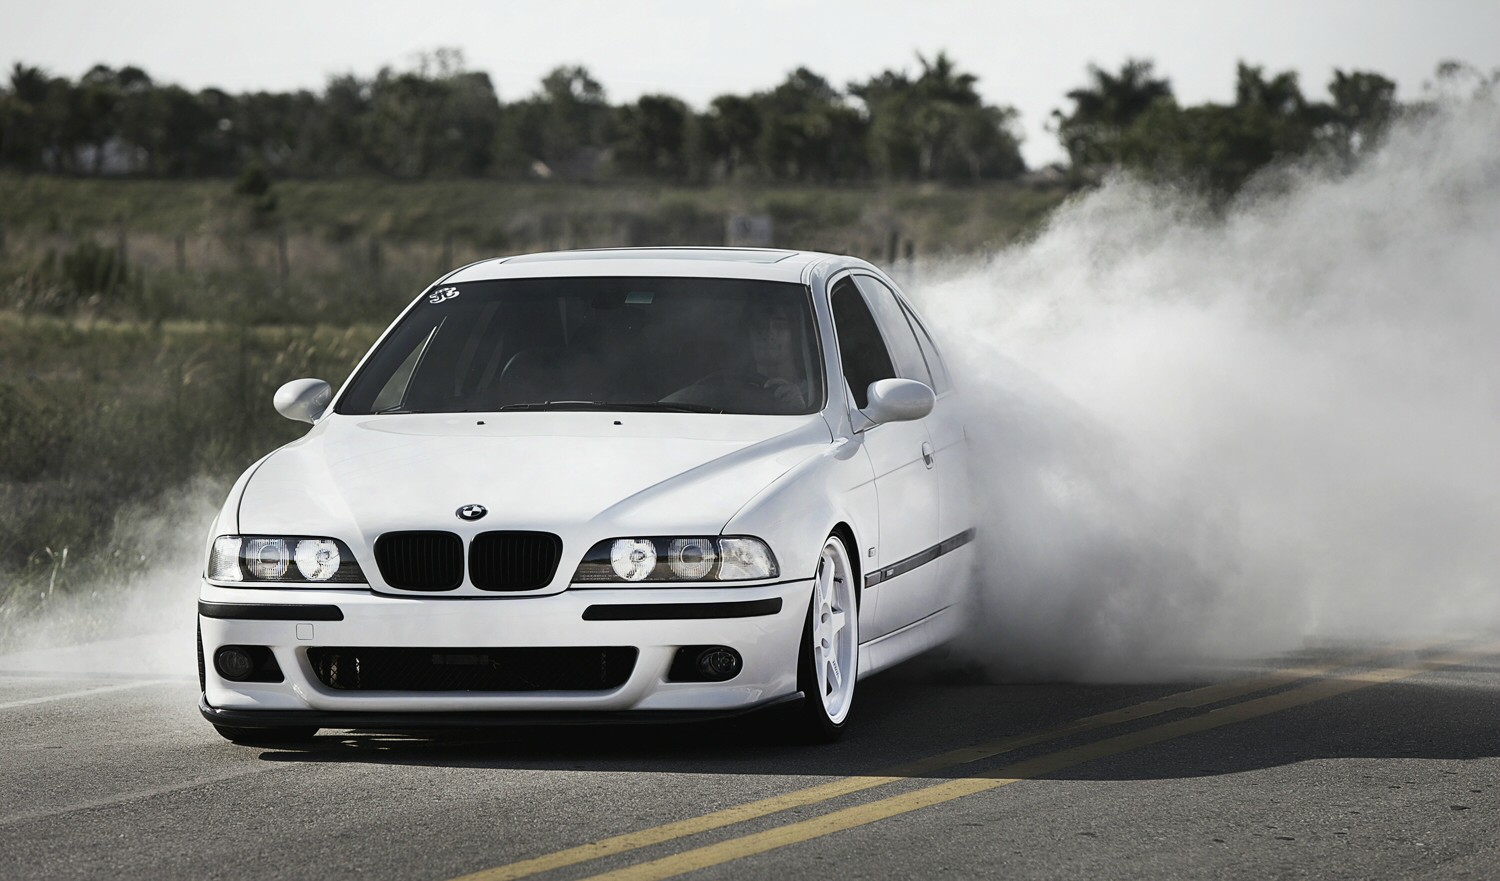 Video Reveals the Real Insides of the Iconic E39 BMW M5